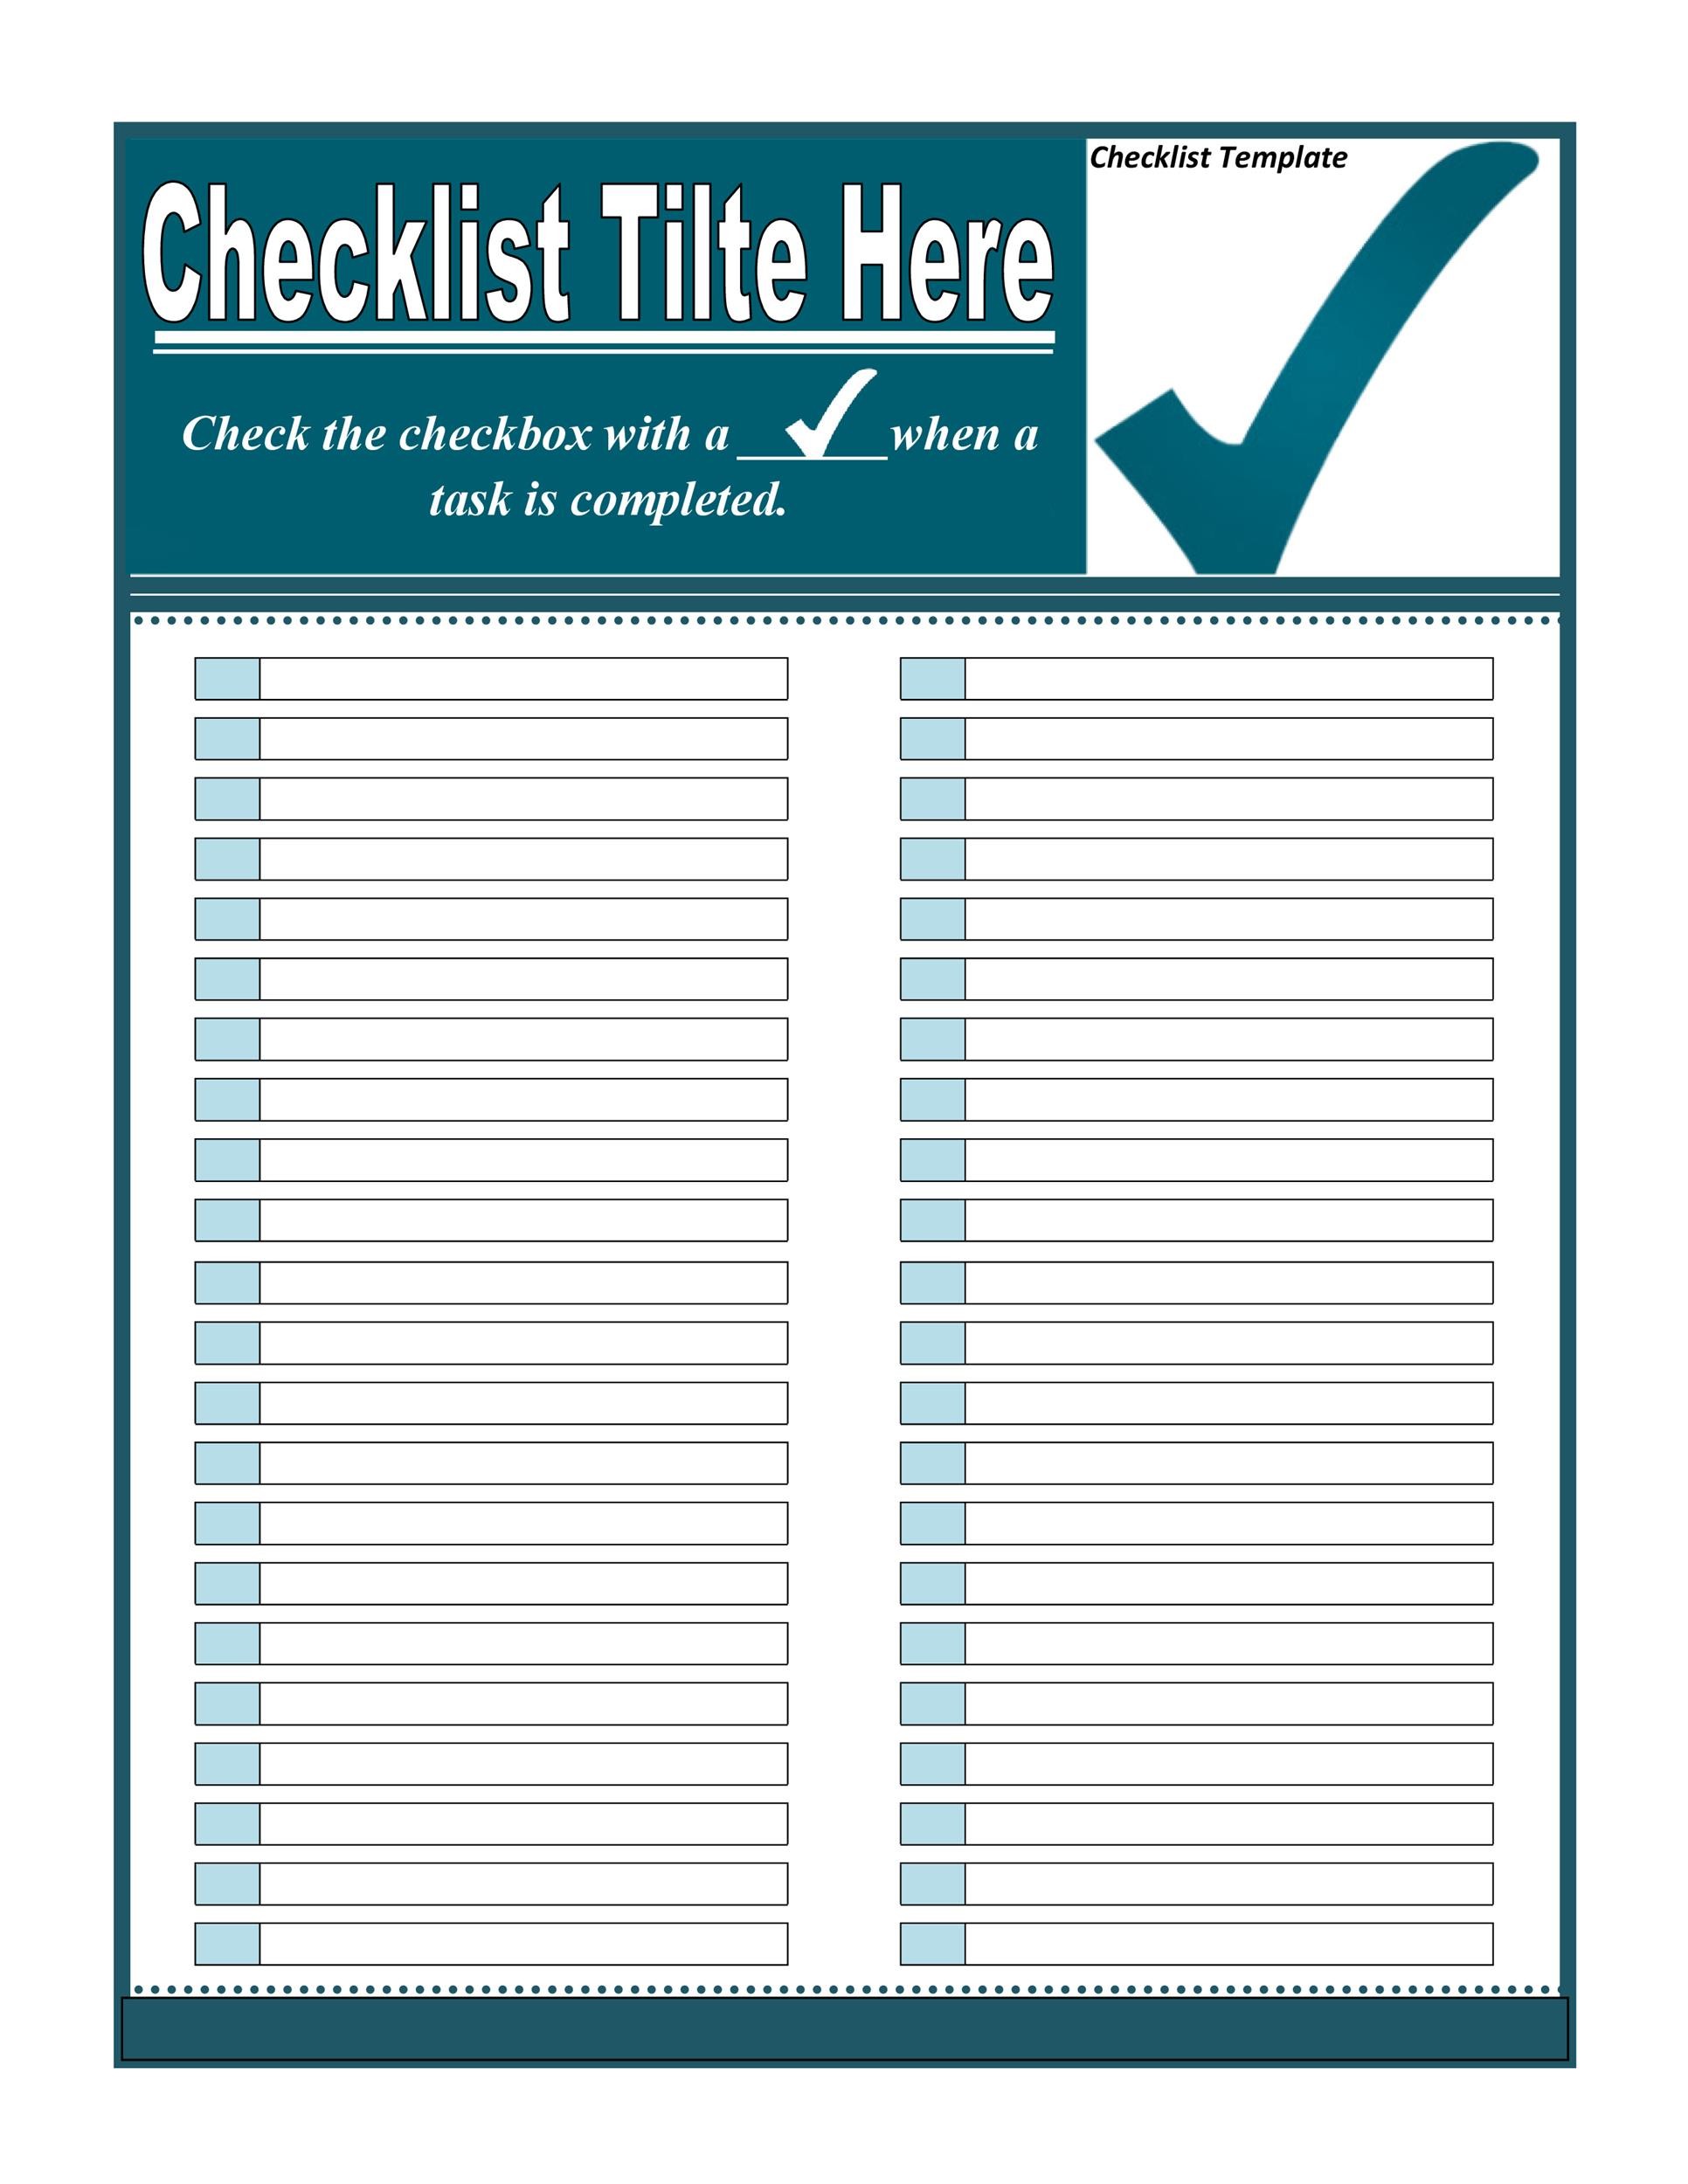 requirements-checklist-excel-samples-excel-list-template-sample